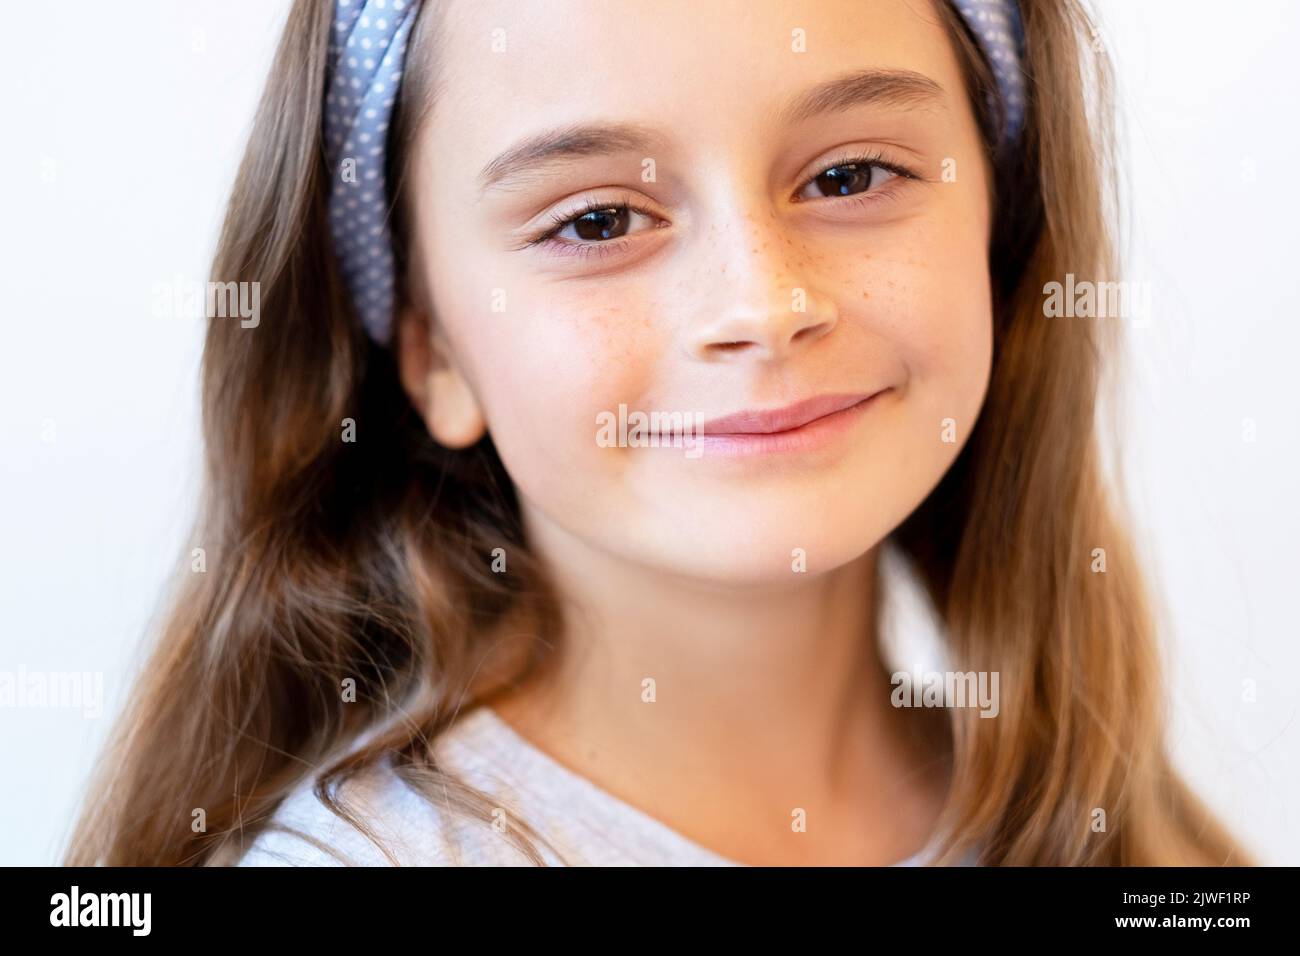 happy kid portrait child beauty smiling girl face Stock Photo